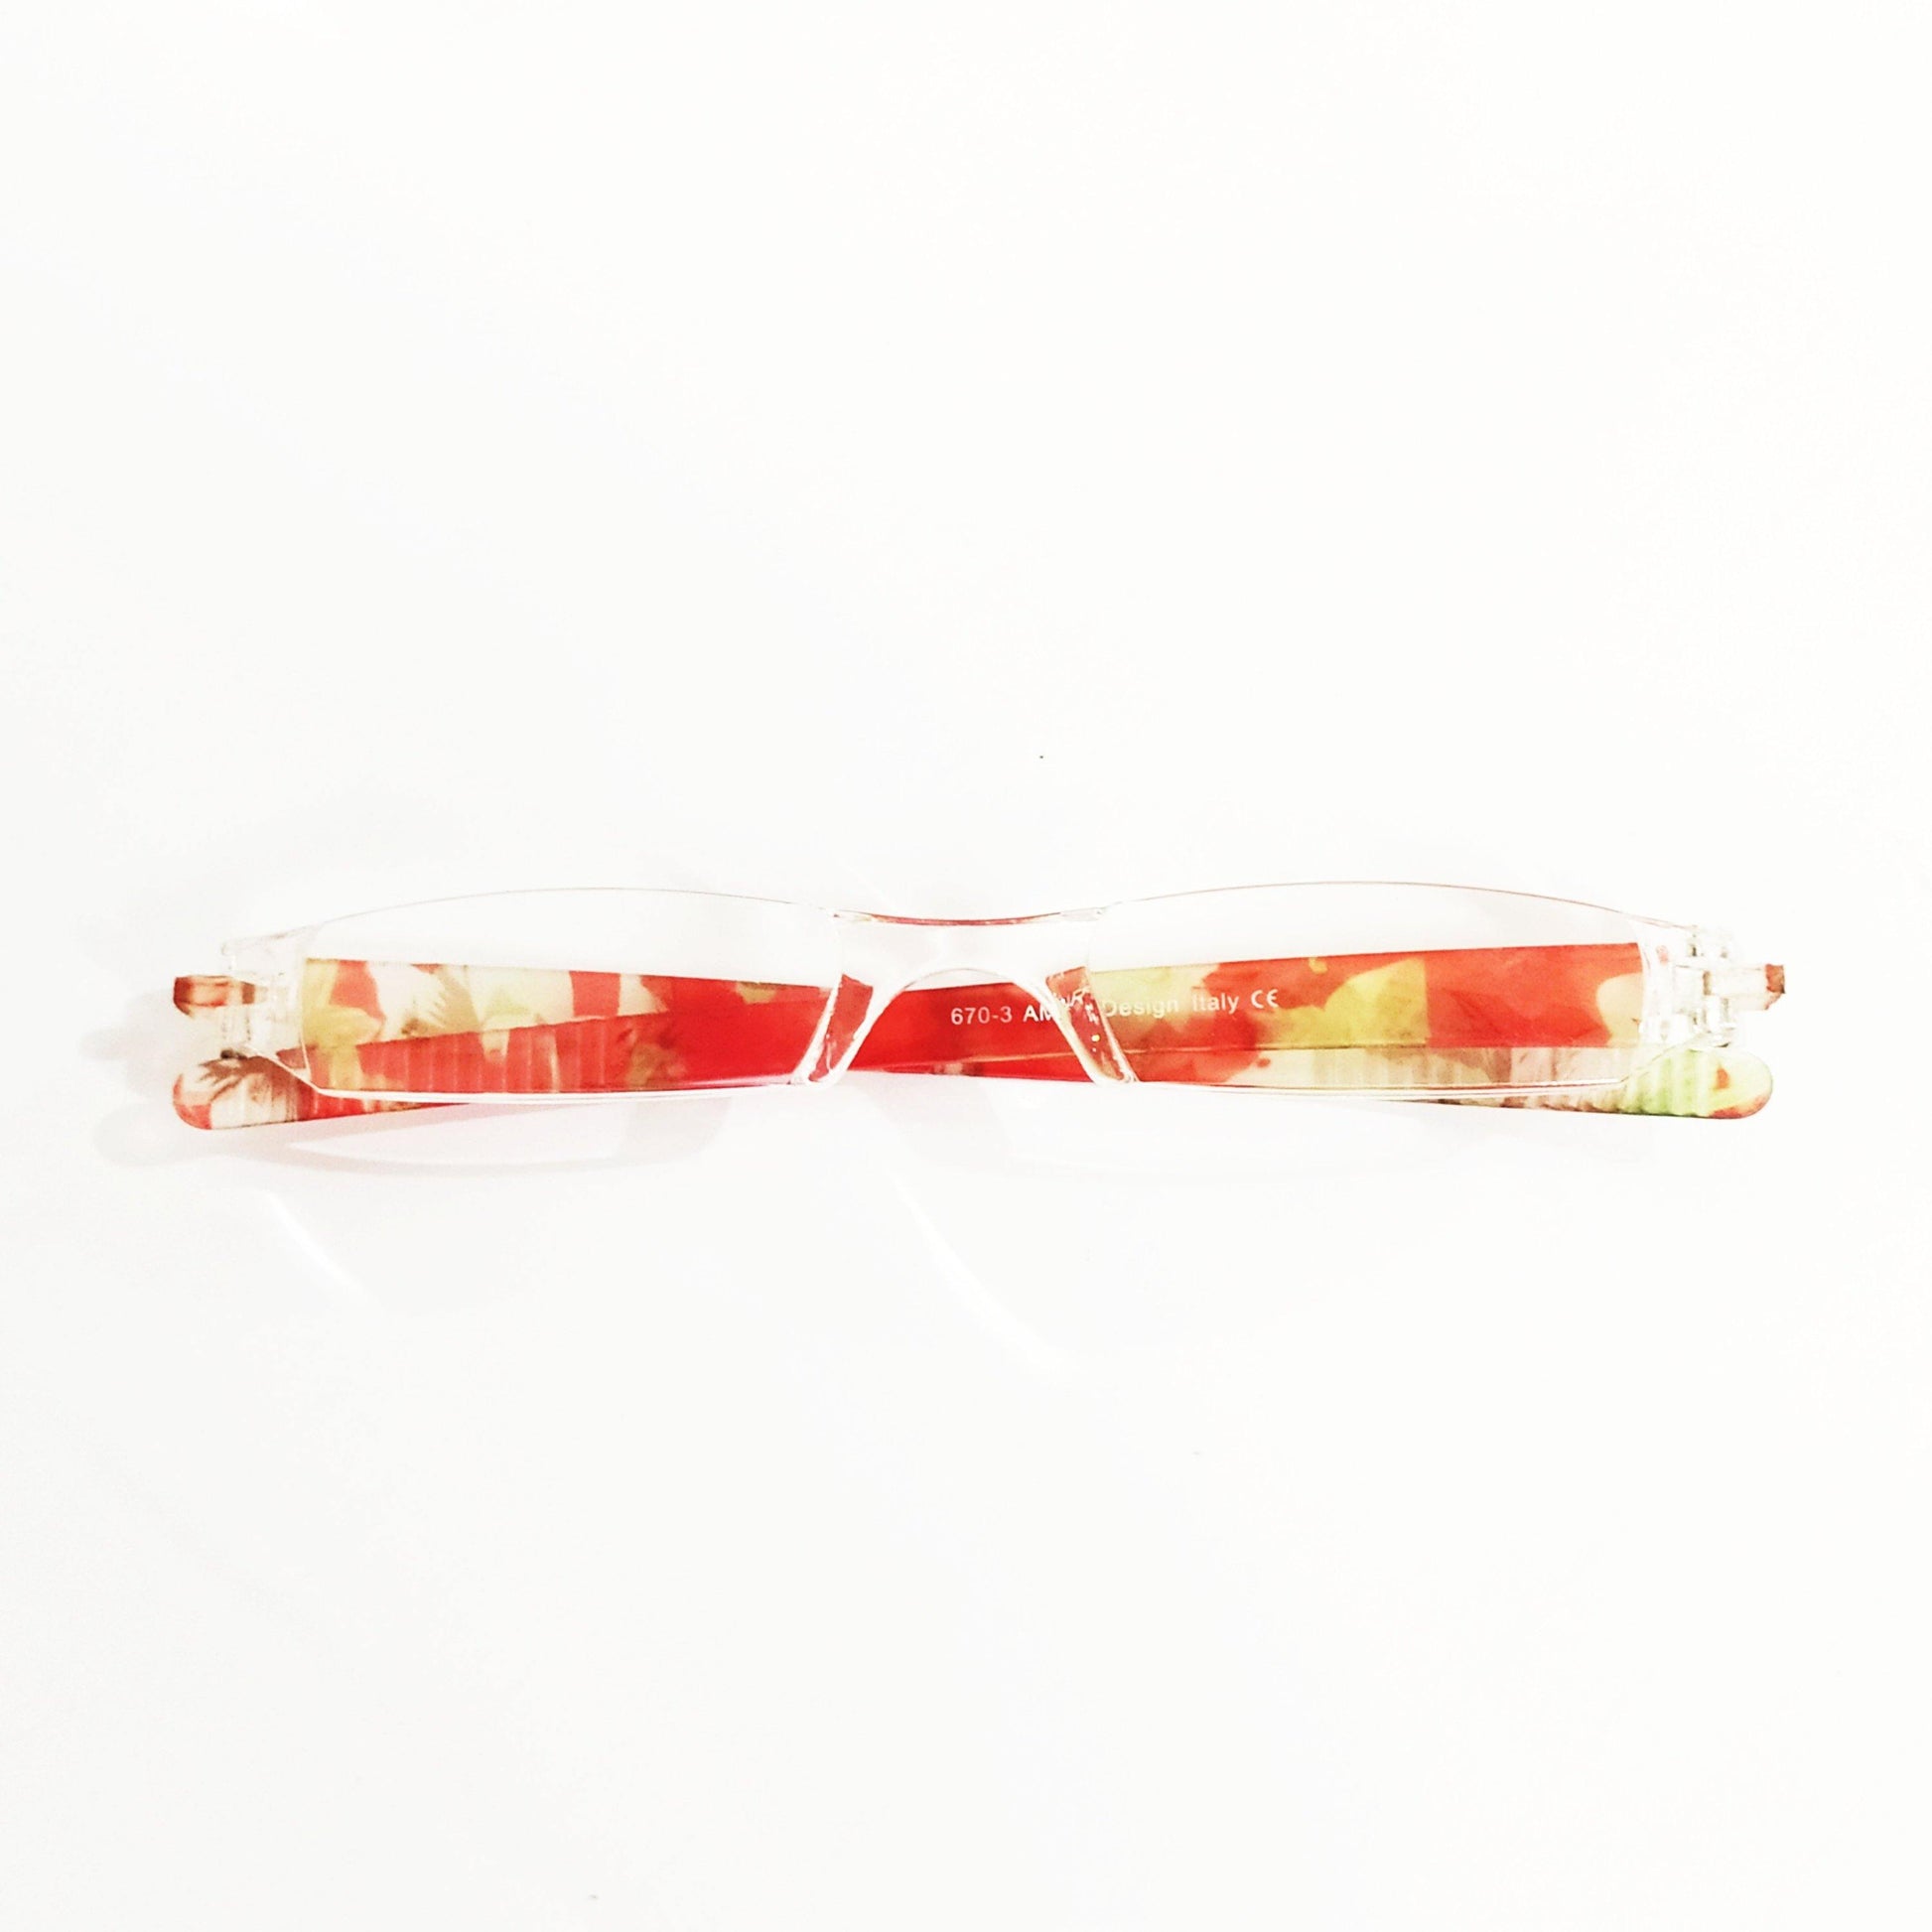 Buy Power Plus +2.50 Reading Glasses Floral Design 670-3 - Glasses India Online in India